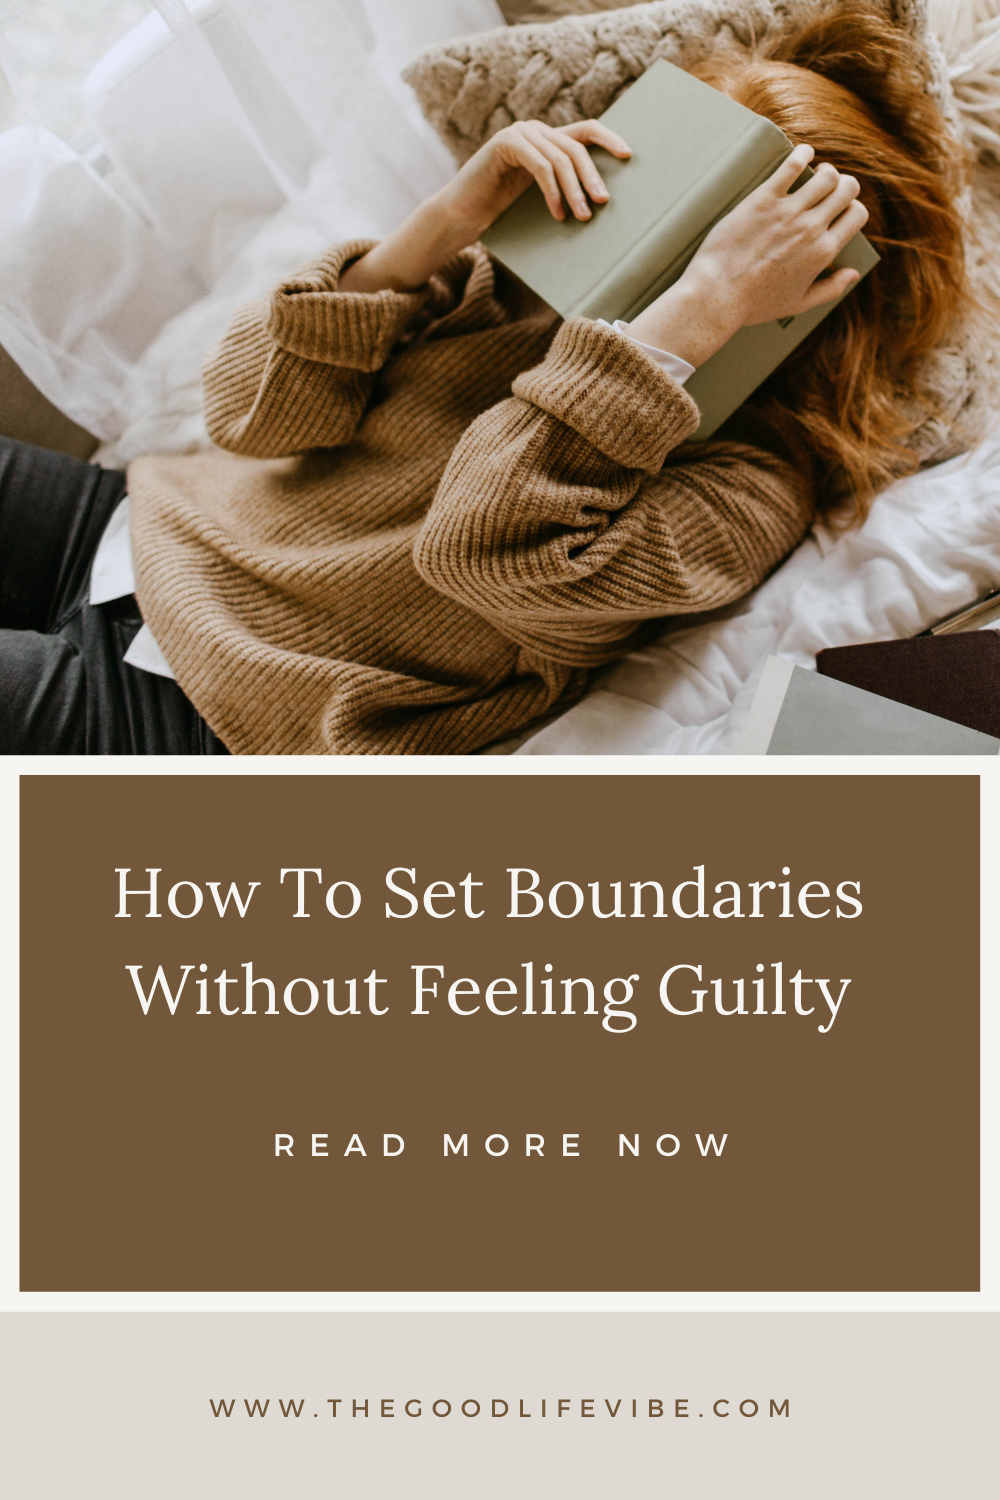 How To Set Boundaries Without Feeling Guilty